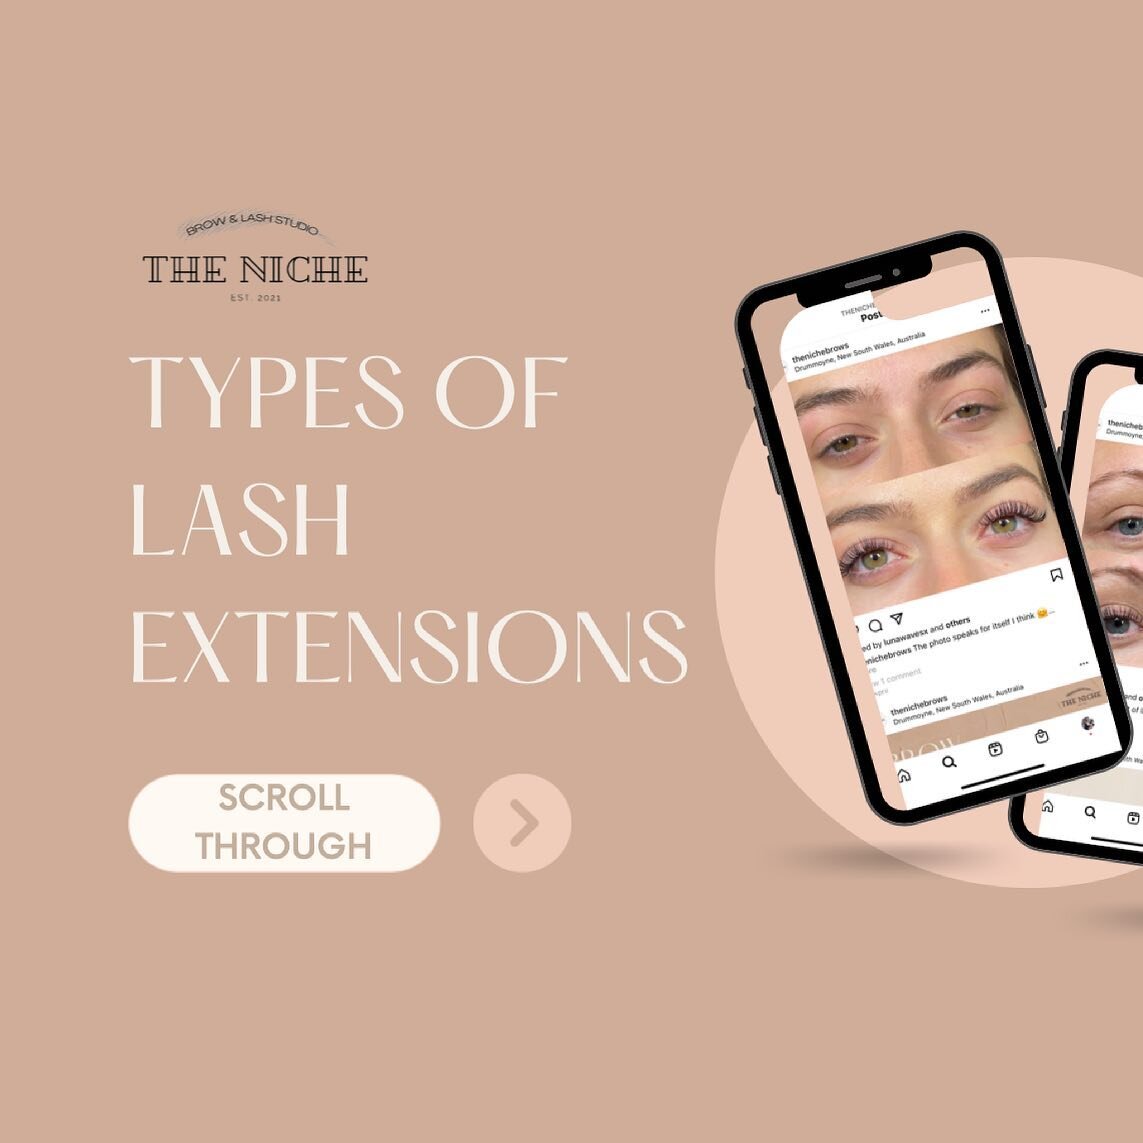 I get these questions all the time! What are the differences in lash extensions? Lemme break it down for you. 👀

There are three types of lash extensions: 

🌟 CLASSIC 
🌟 HYBRID
🌟 VOLUME

➡️ CLASSIC // for that seamlessly natural look 
➡️ HYBRID /